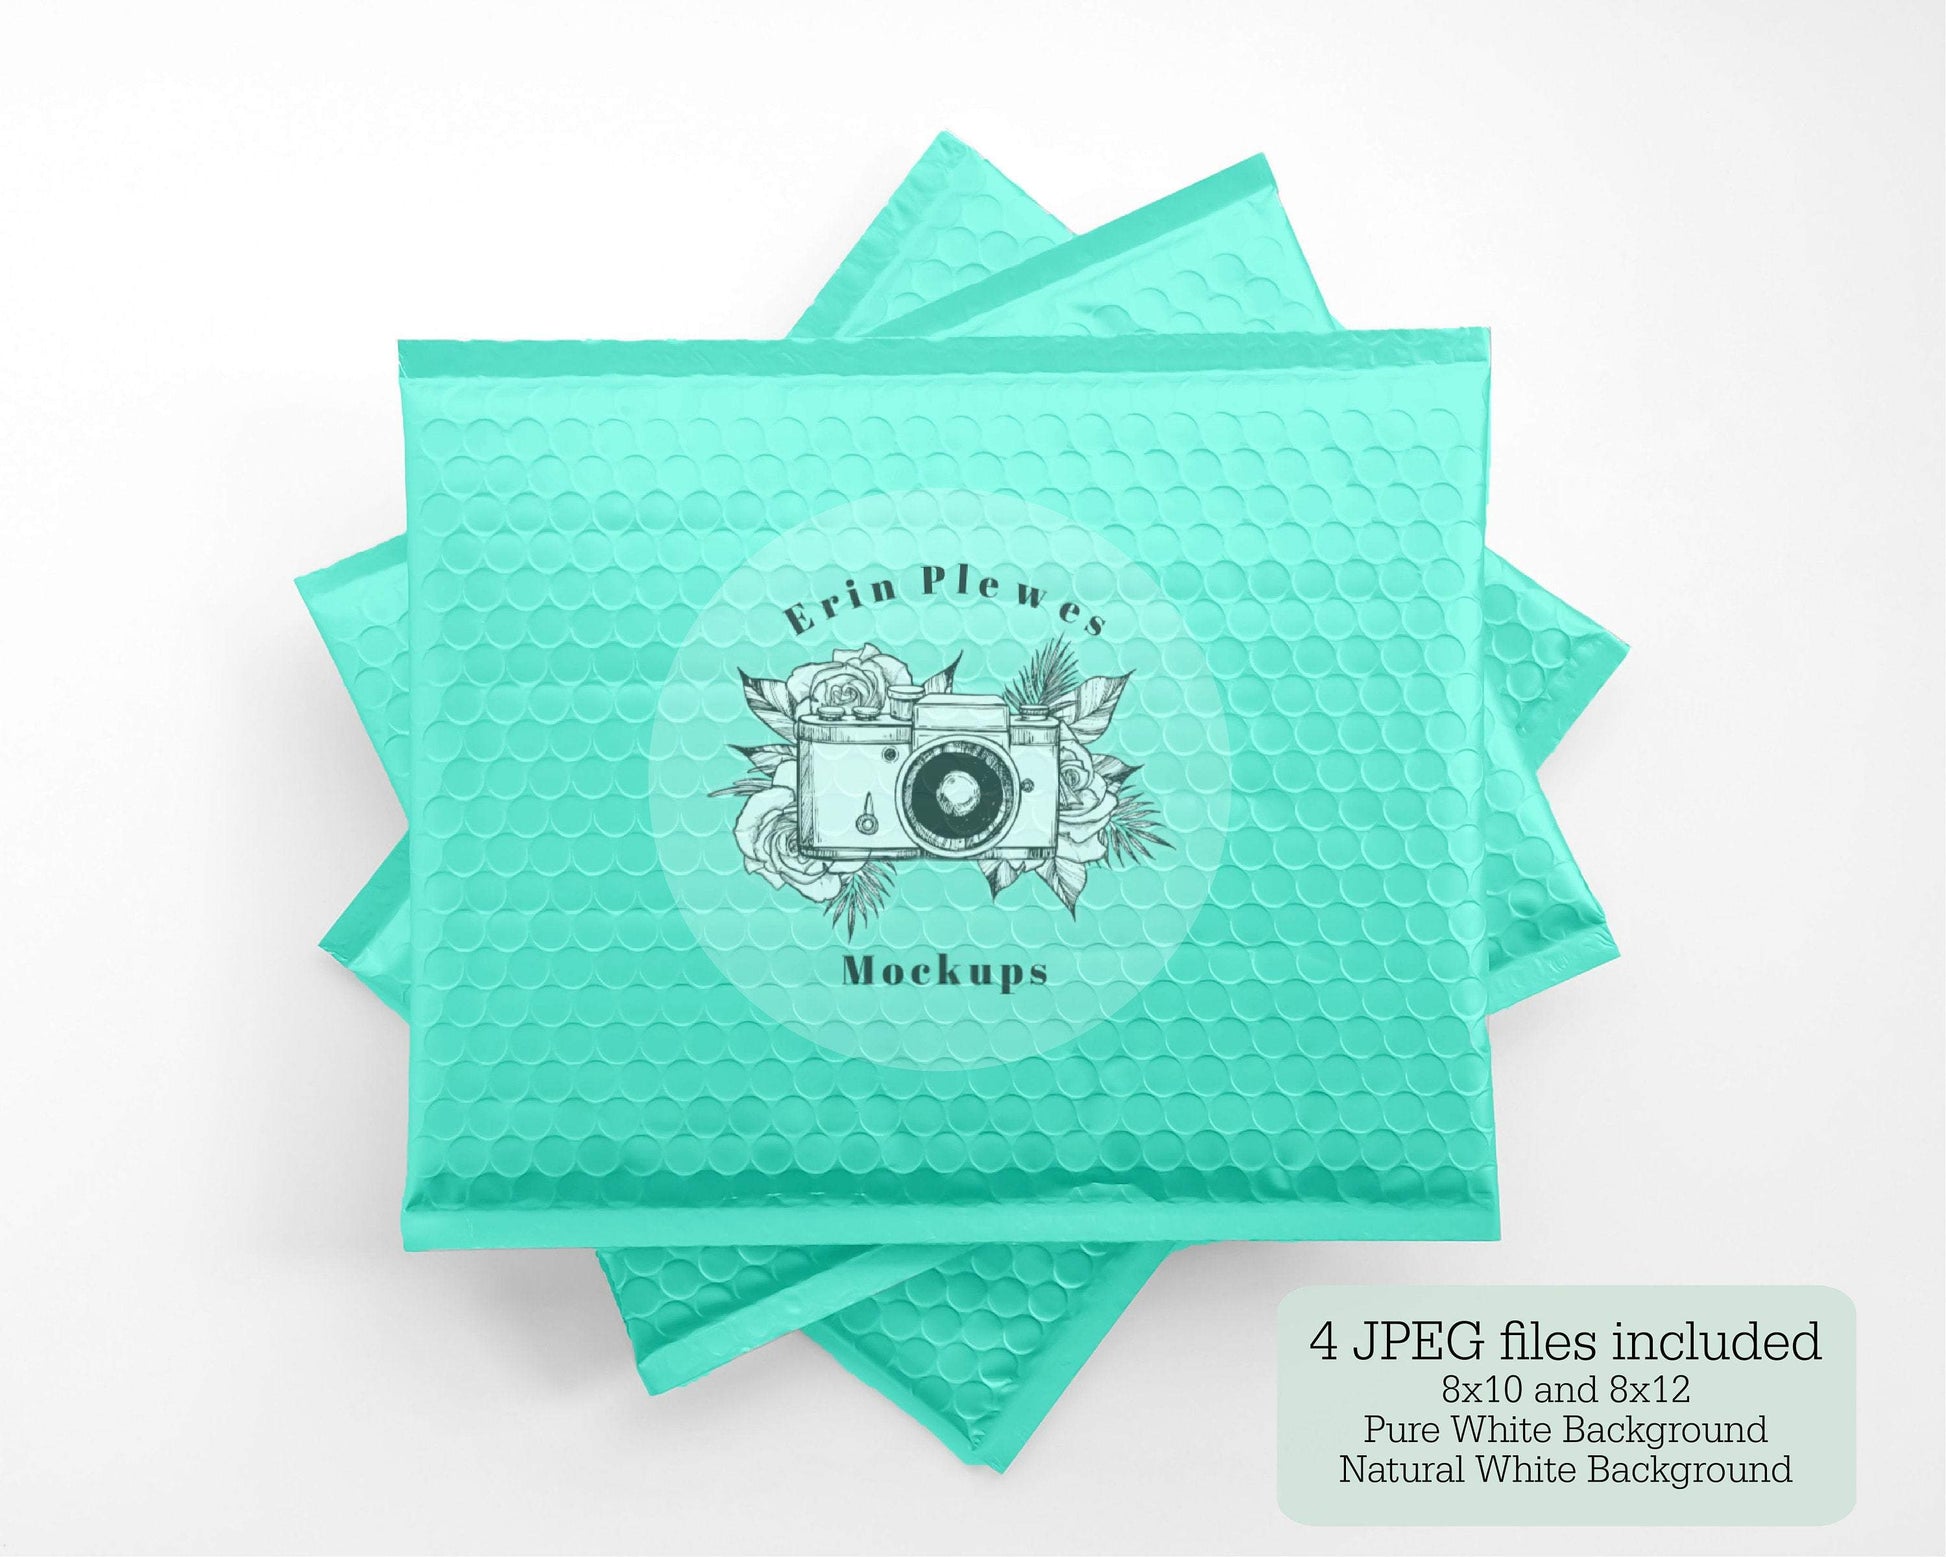 Erin Plewes Mockups Bubble Mailer Mock-up, Turquoise Poly Mailer Mockup, Green Shipping Mailer Stock Photo, Jpeg Instant Digital Download Template